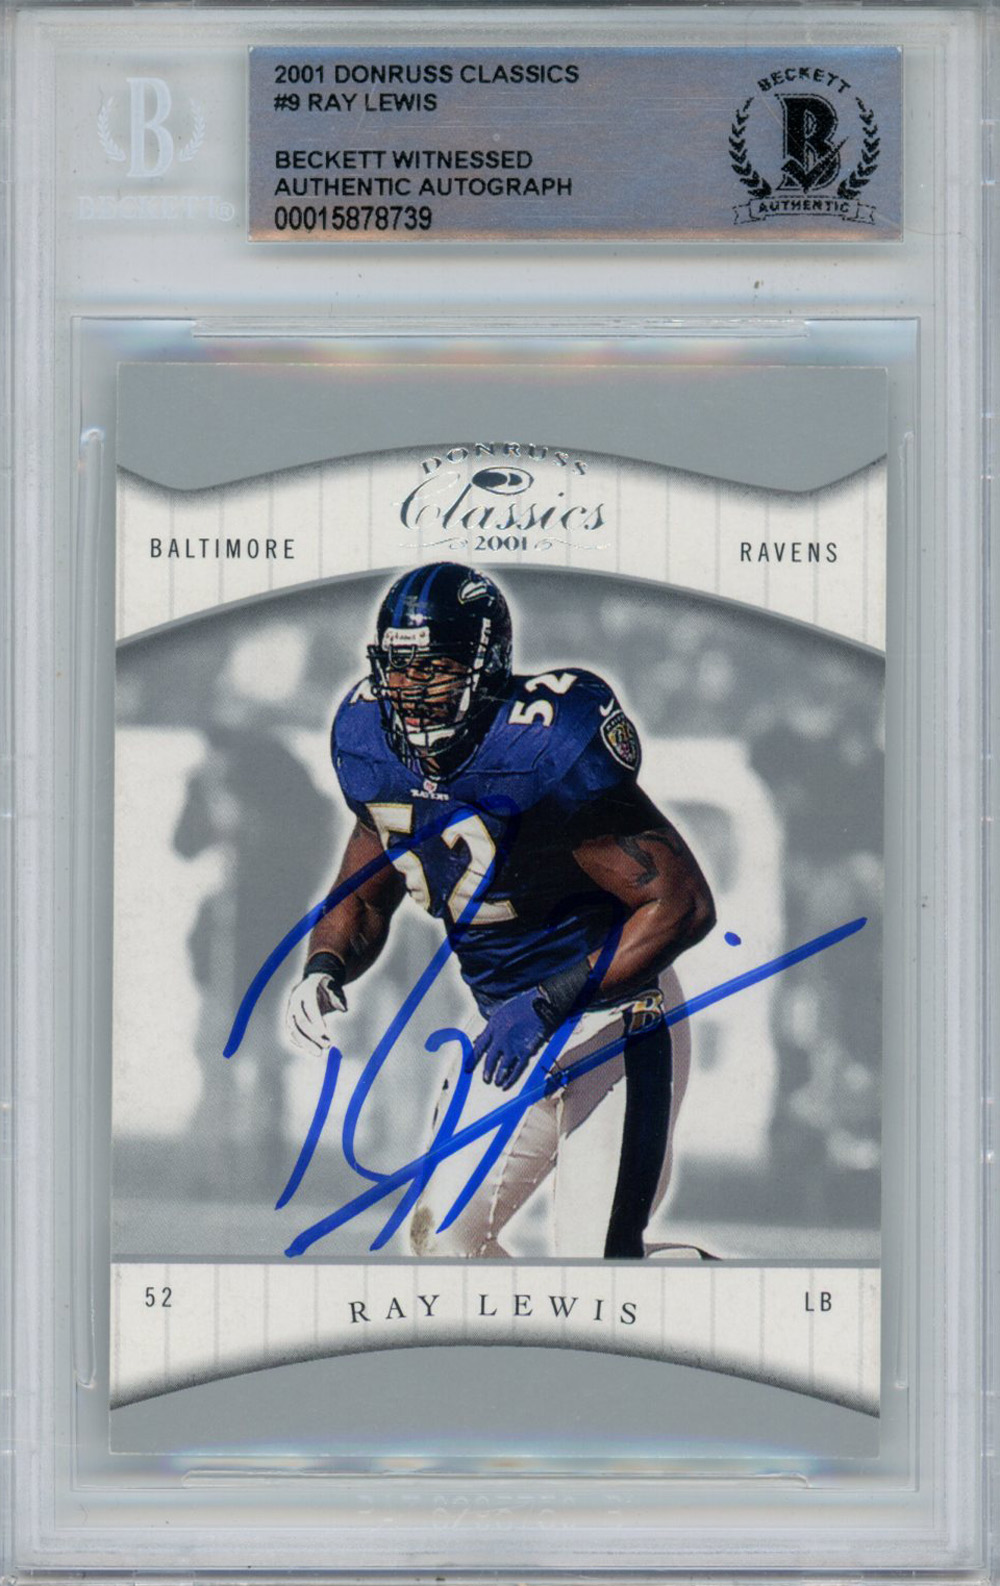 Ray Lewis Autographed 2001 Donruss Classics #9 Trading Card Beckett Slab